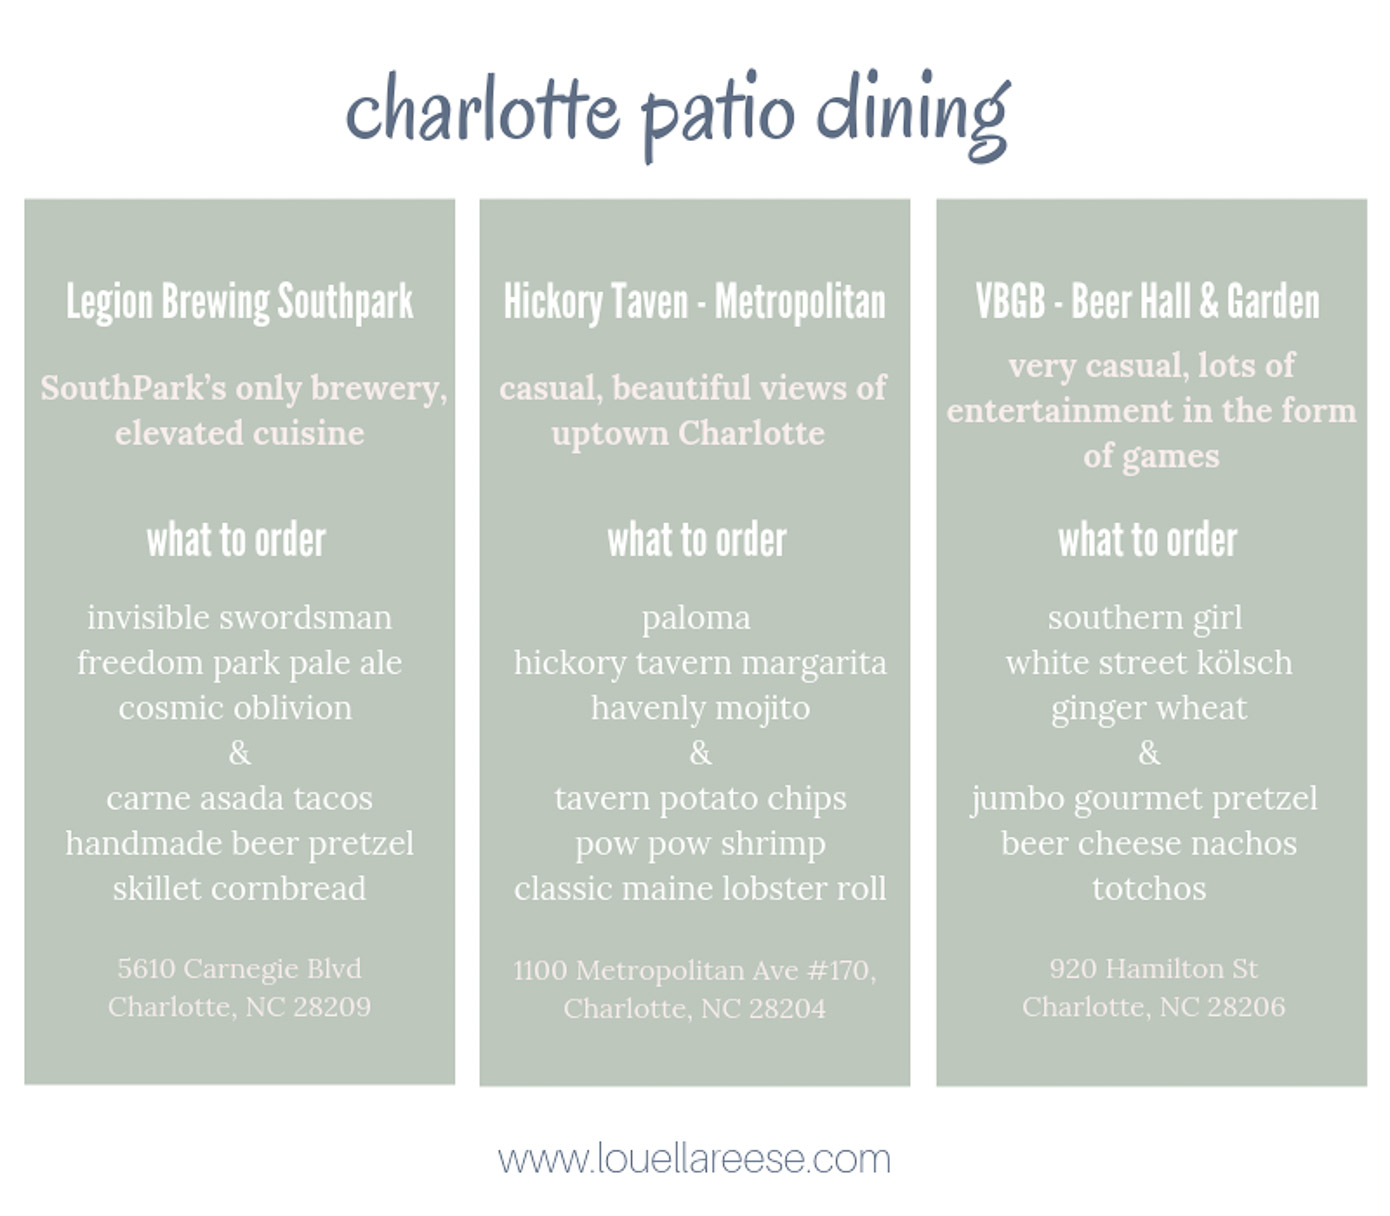 The Best Patio Dining in Charlotte NC | Where to Dine Outside in Charlotte | Louella Reese